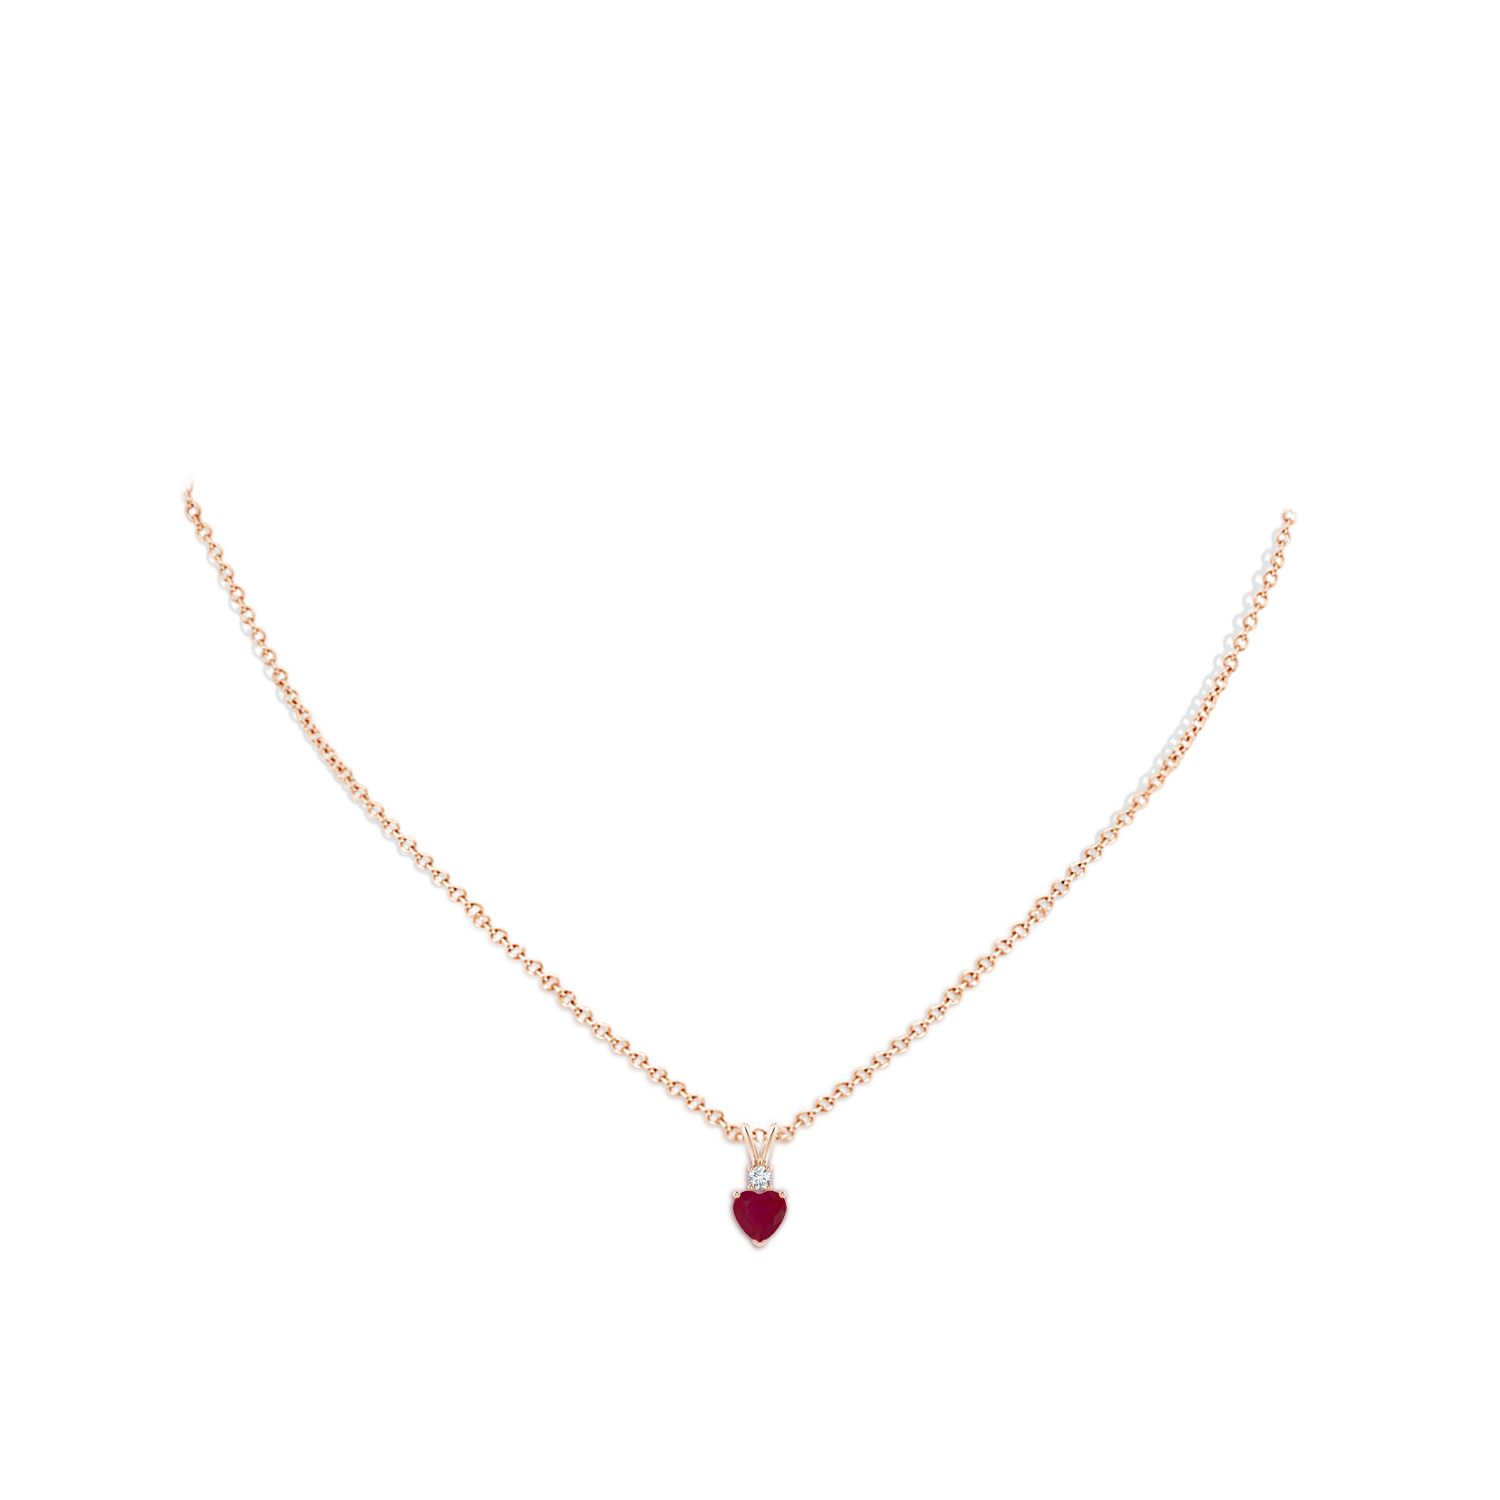 A - Ruby / 0.59 CT / 14 KT Rose Gold